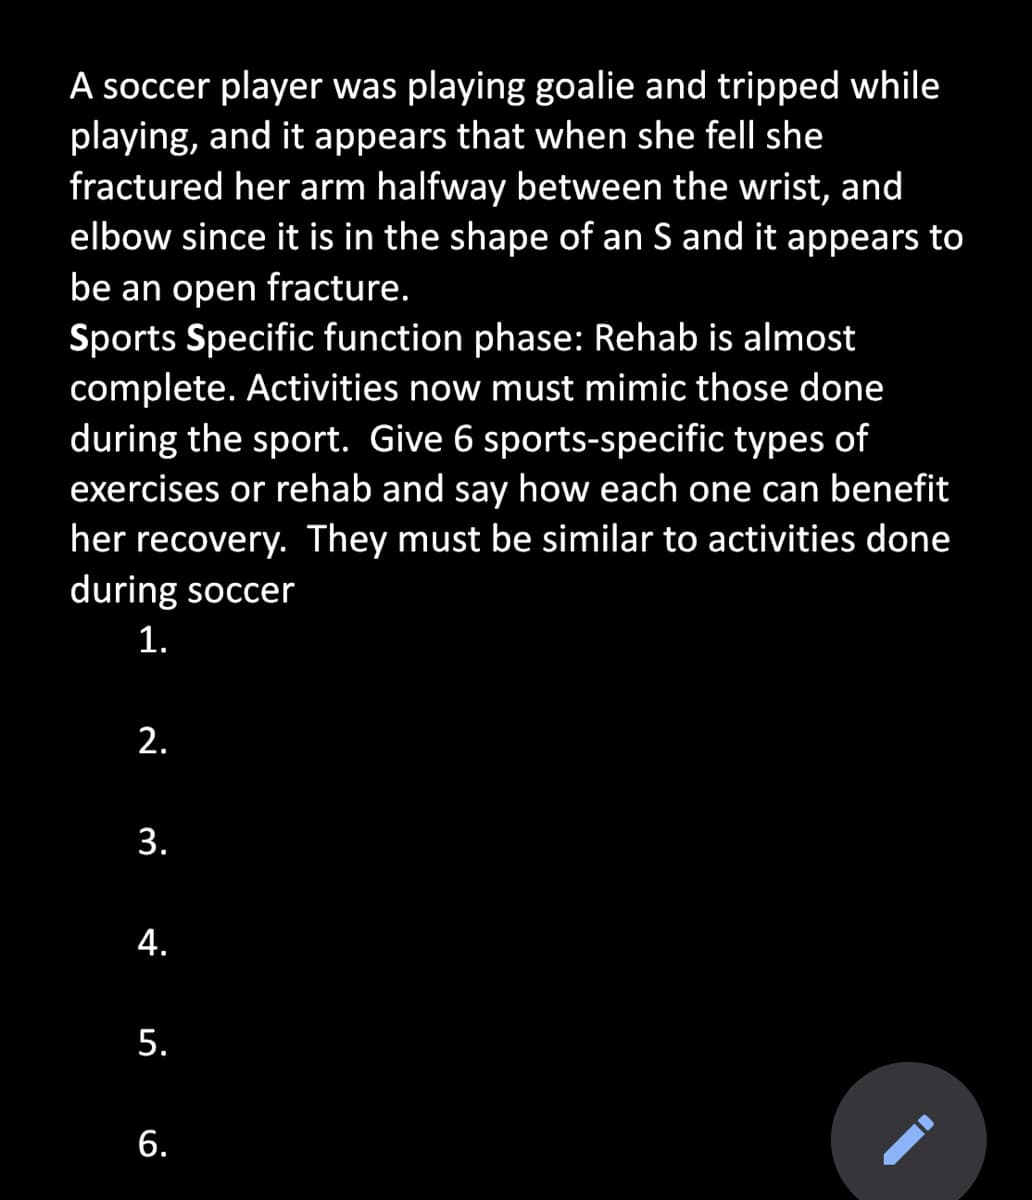 A soccer player was playing goalie and tripped while
playing, and it appears that when she fell she
fractured her arm halfway between the wrist, and
elbow since it is in the shape of an S and it appears to
be an open fracture.
Sports Specific function phase: Rehab is almost
complete. Activities now must mimic those done
during the sport. Give 6 sports-specific types of
exercises or rehab and say how each one can benefit
her recovery. They must be similar to activities done
during soccer
1.
2.
3.
4.
5.
6.
